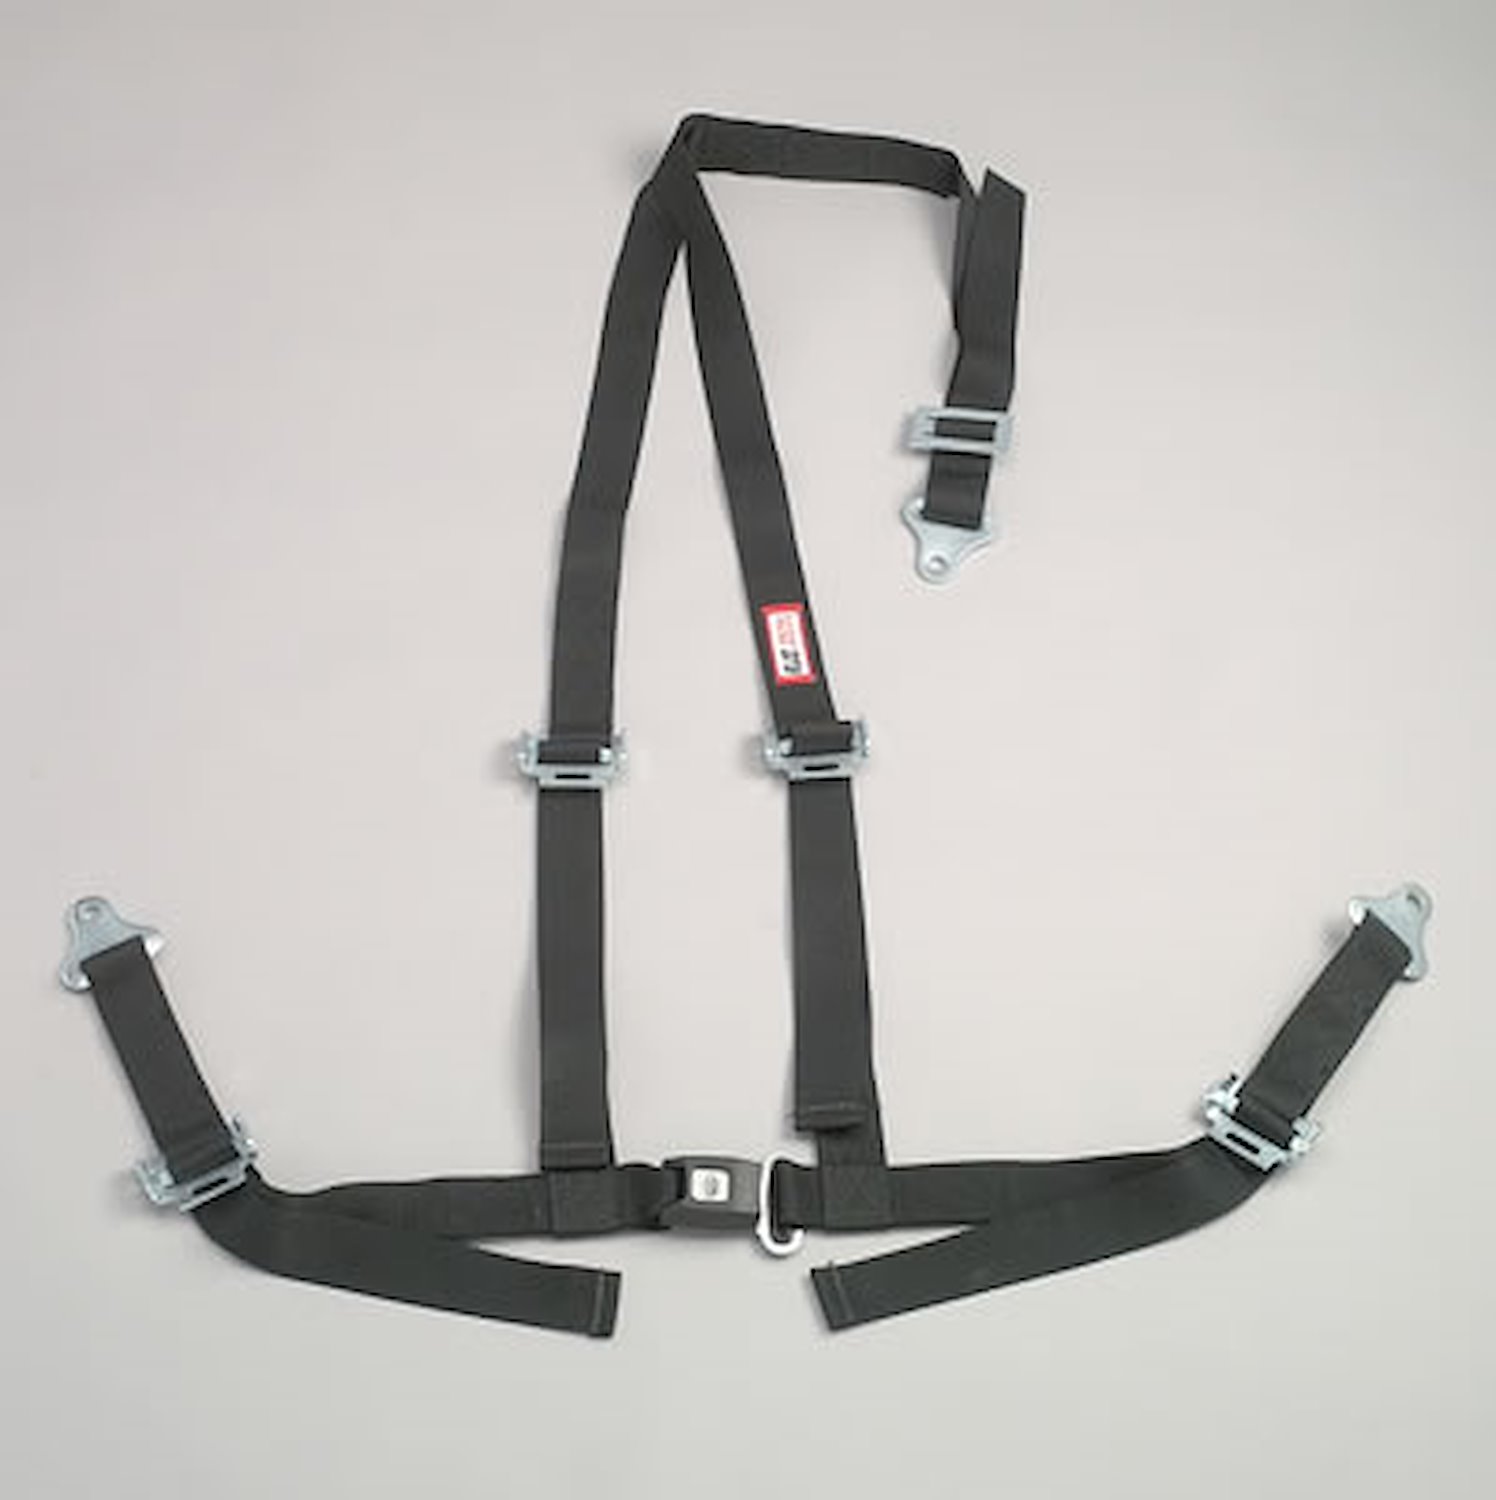 NON-SFI B&T HARNESS 2 PULL DOWN Lap Belt 2 S. H. V ROLL BAR Mount ALL SNAP ENDS w/STERNUM STRAP RED